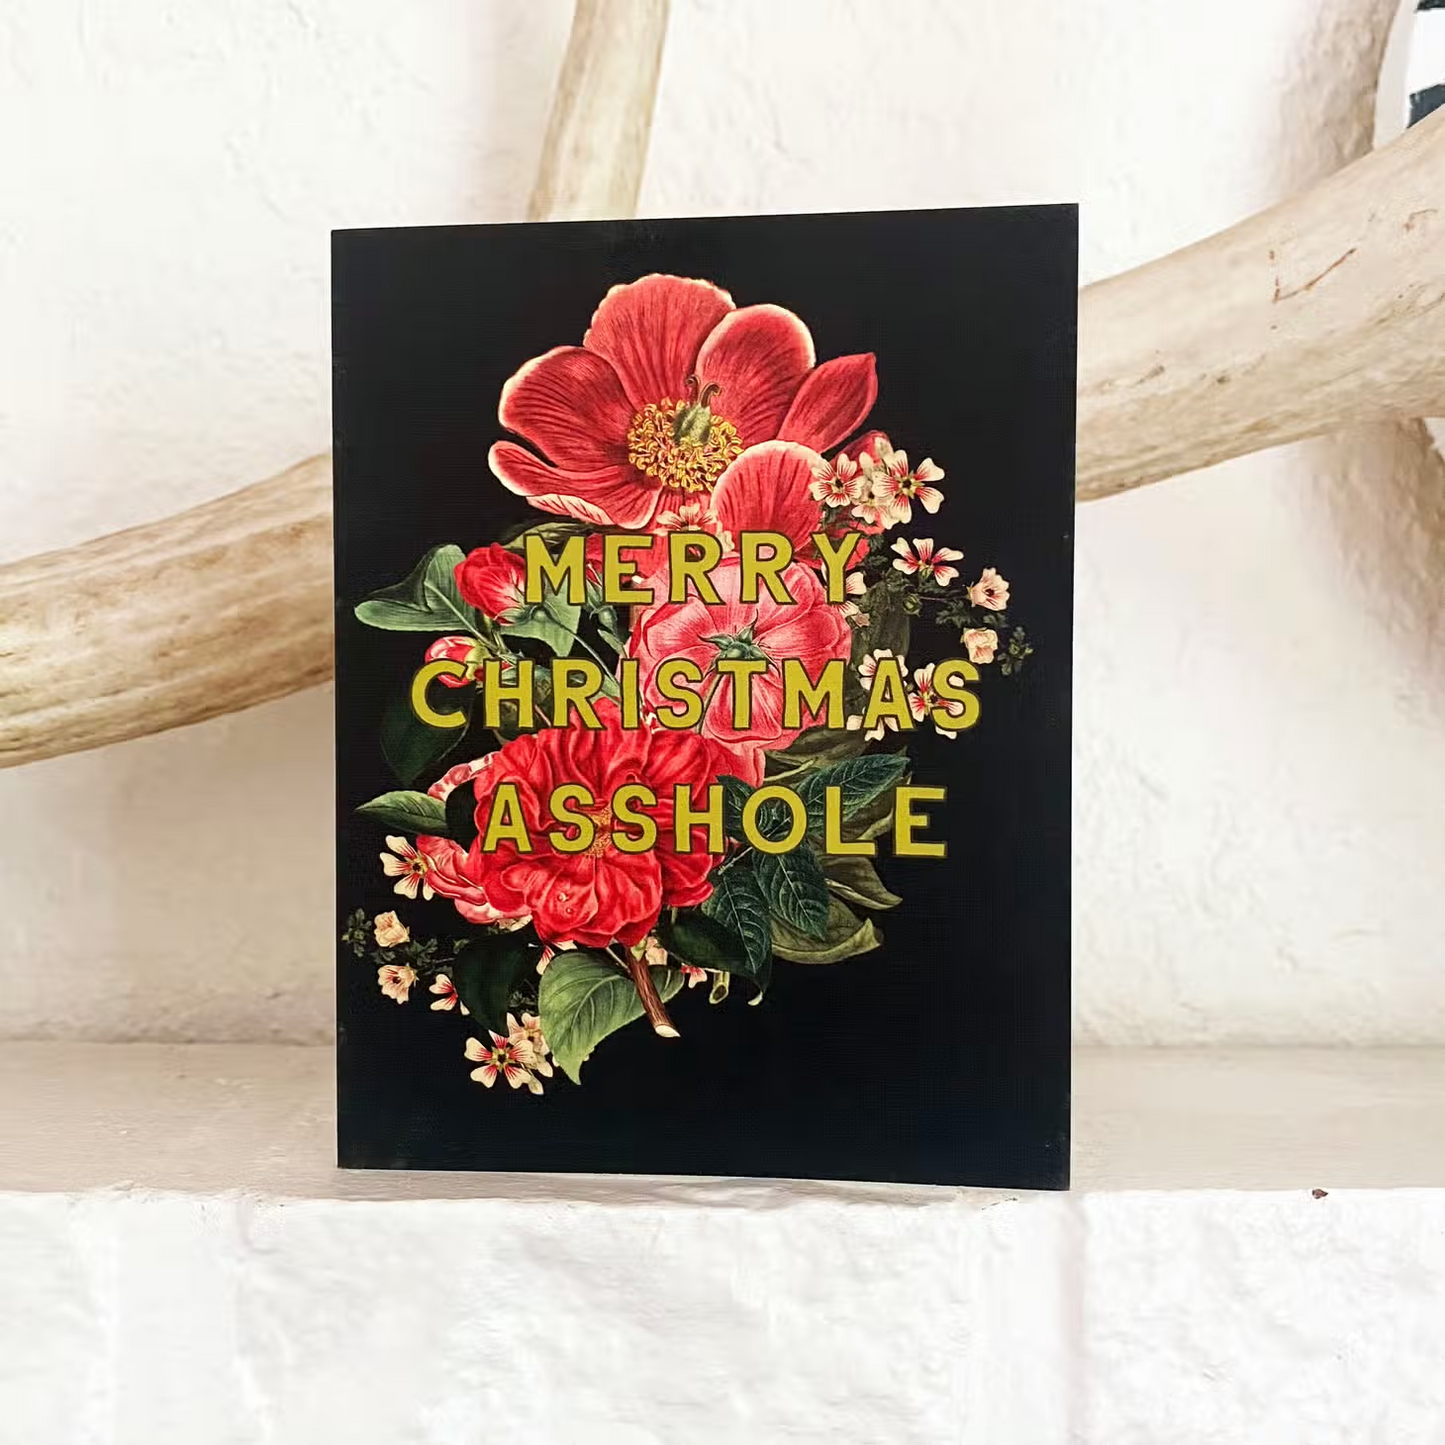 Merry Christmas Asshole Holiday Greeting Card